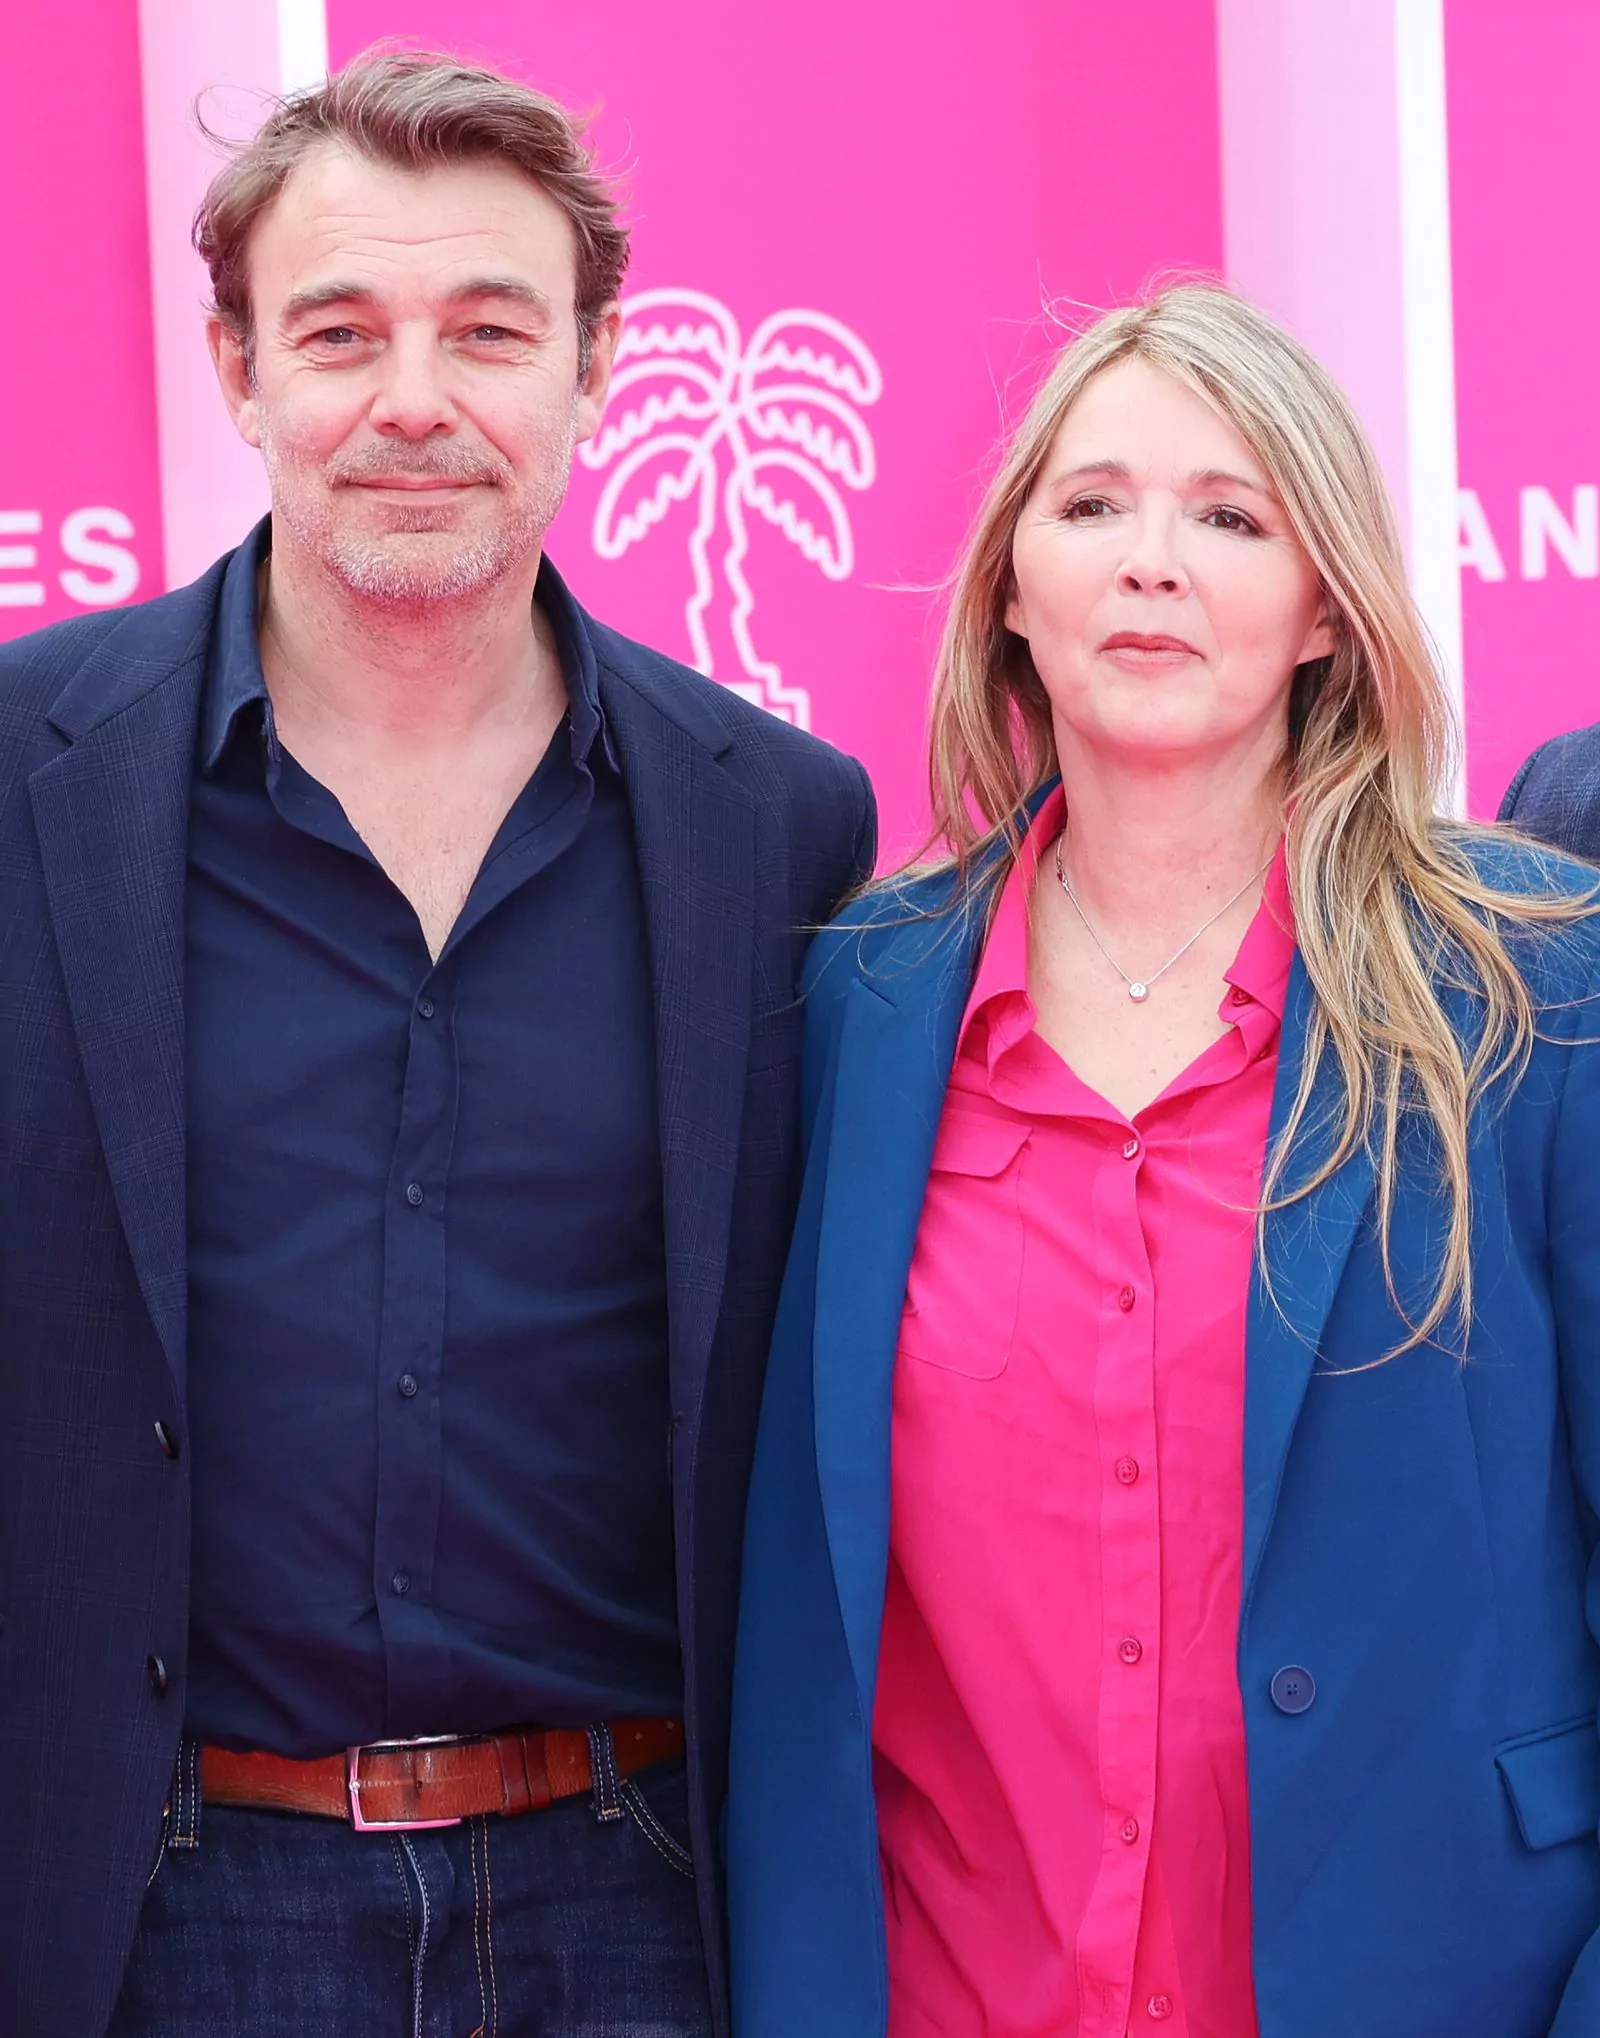 Patrick Pudebat and Hélène Rollet at the 6th Canneseries 2023 International Festival of Series in Cannes, April 14, 2023